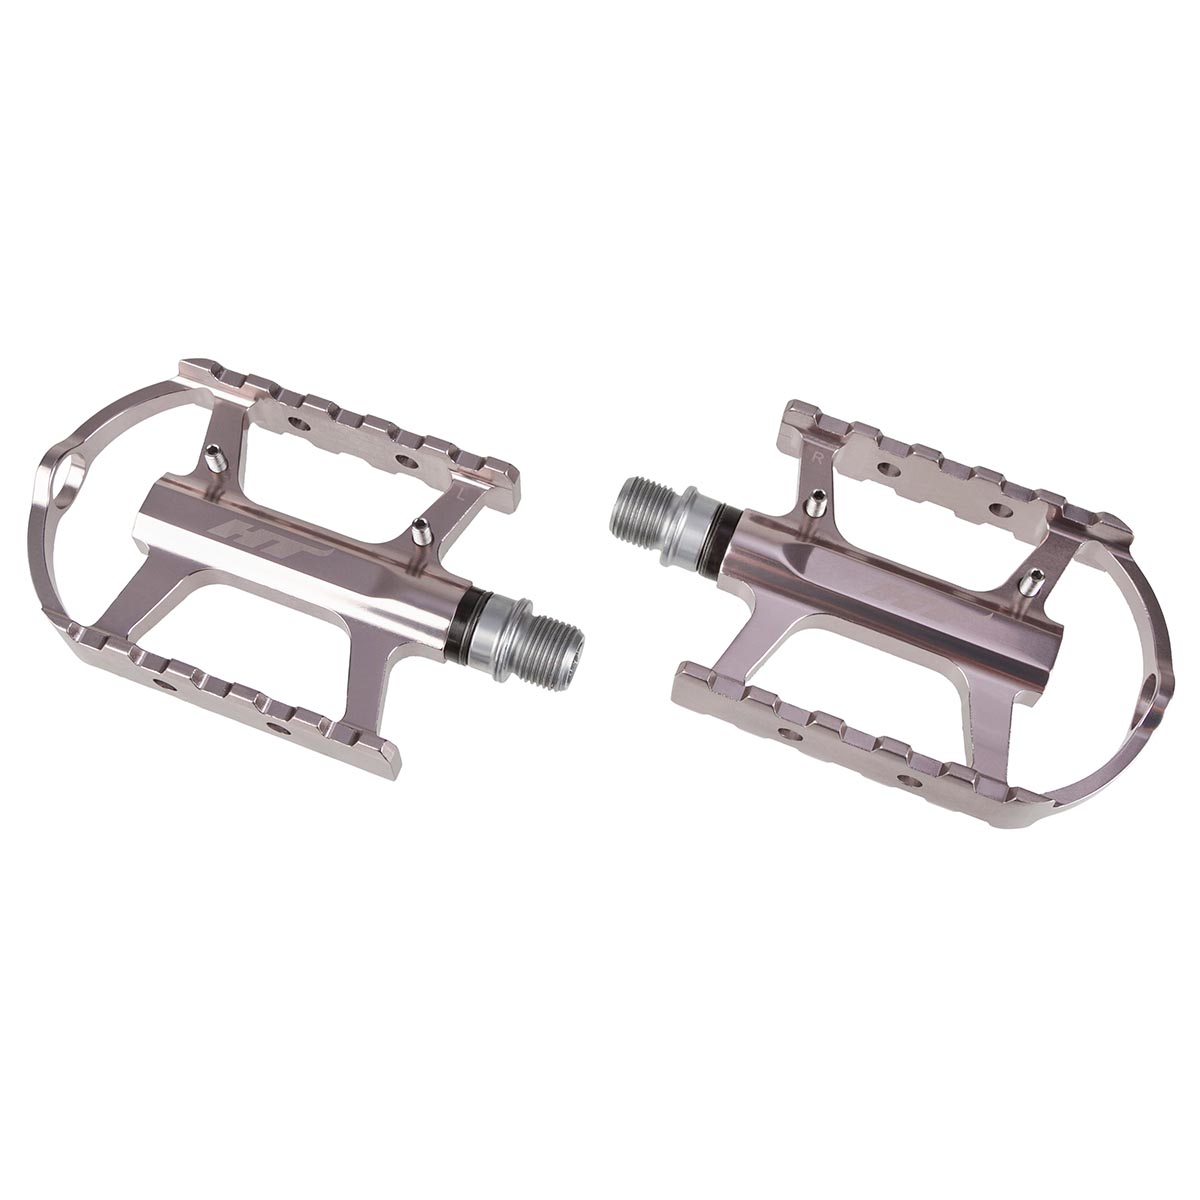 HT Components Pedals ARS02 Grey